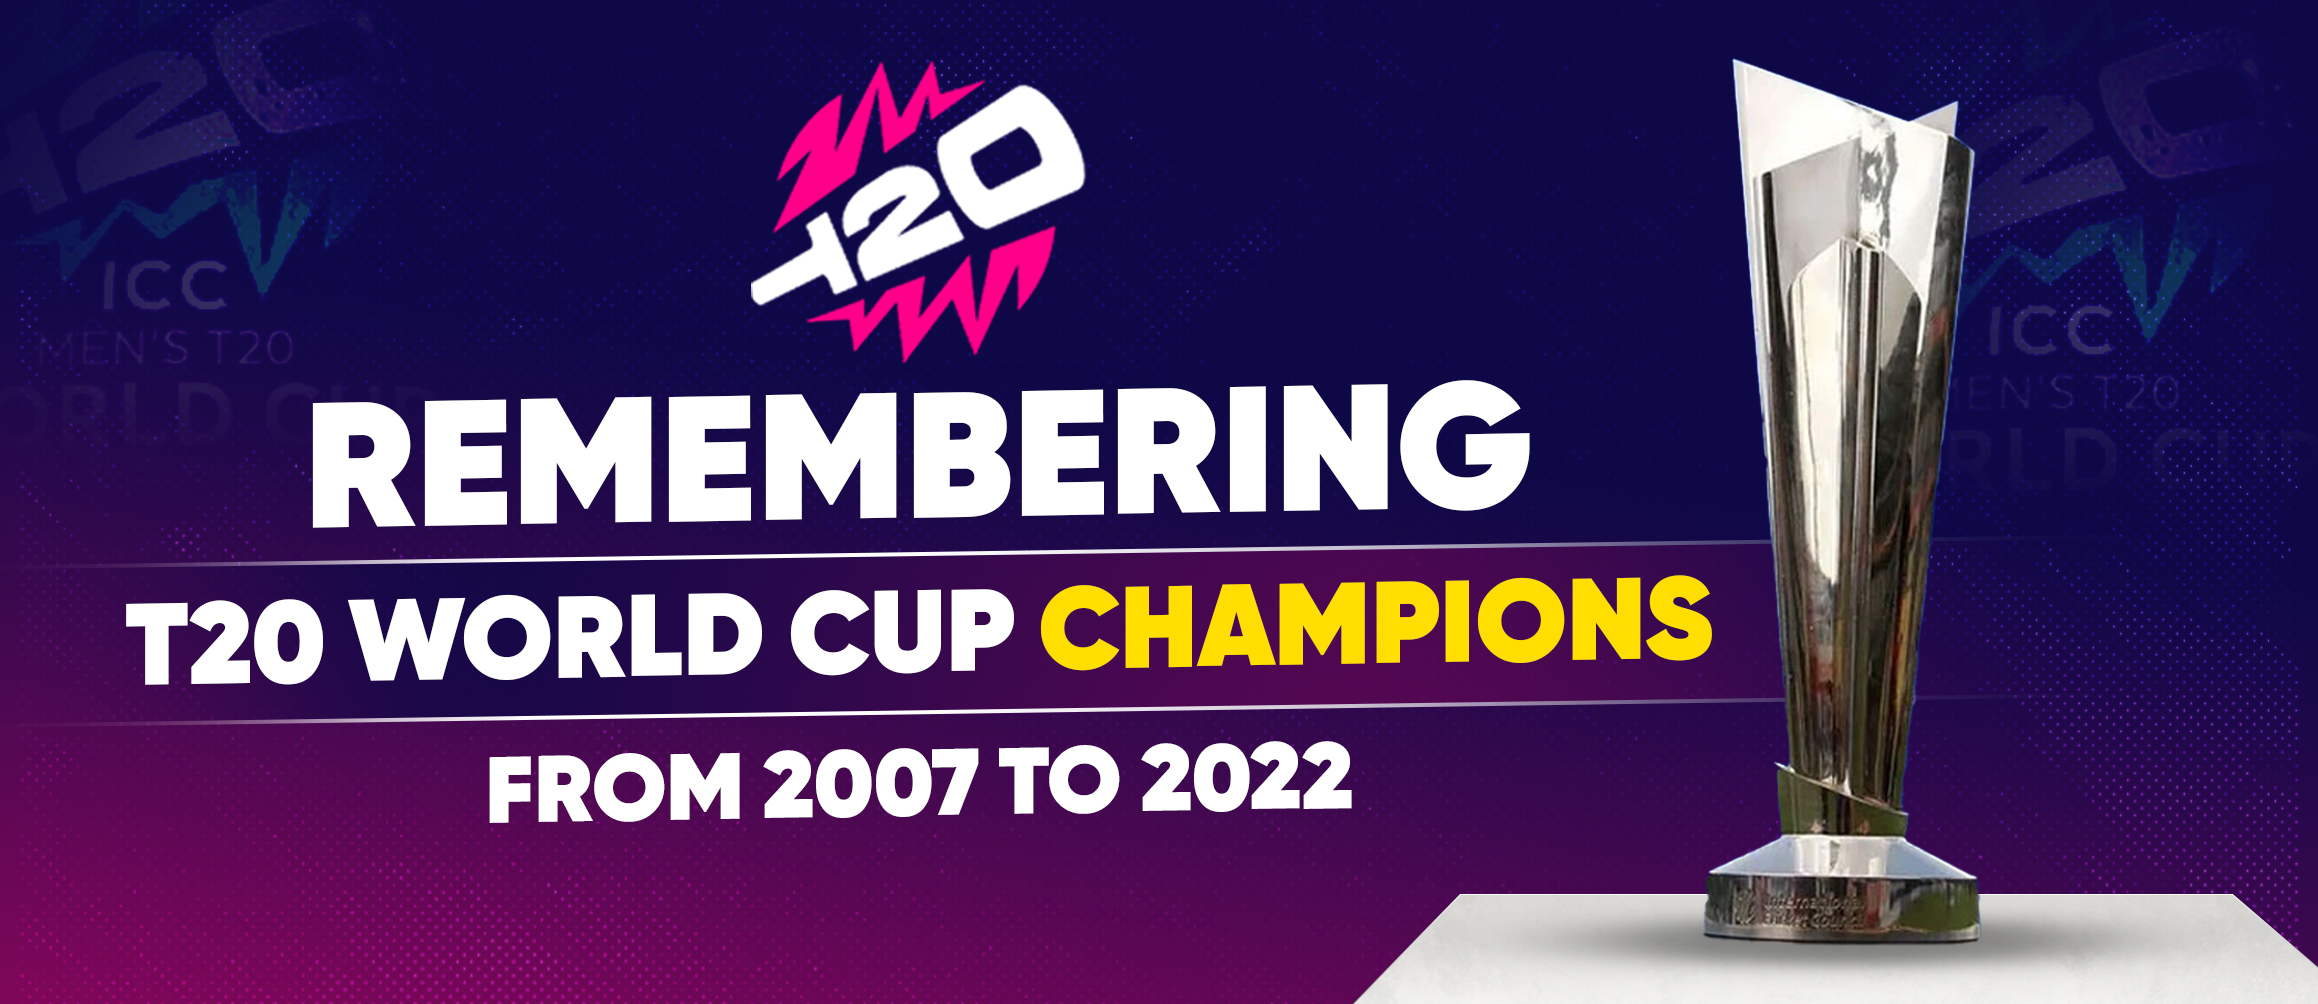 Remembering T20 World Cup Champions From 2007 To 2022